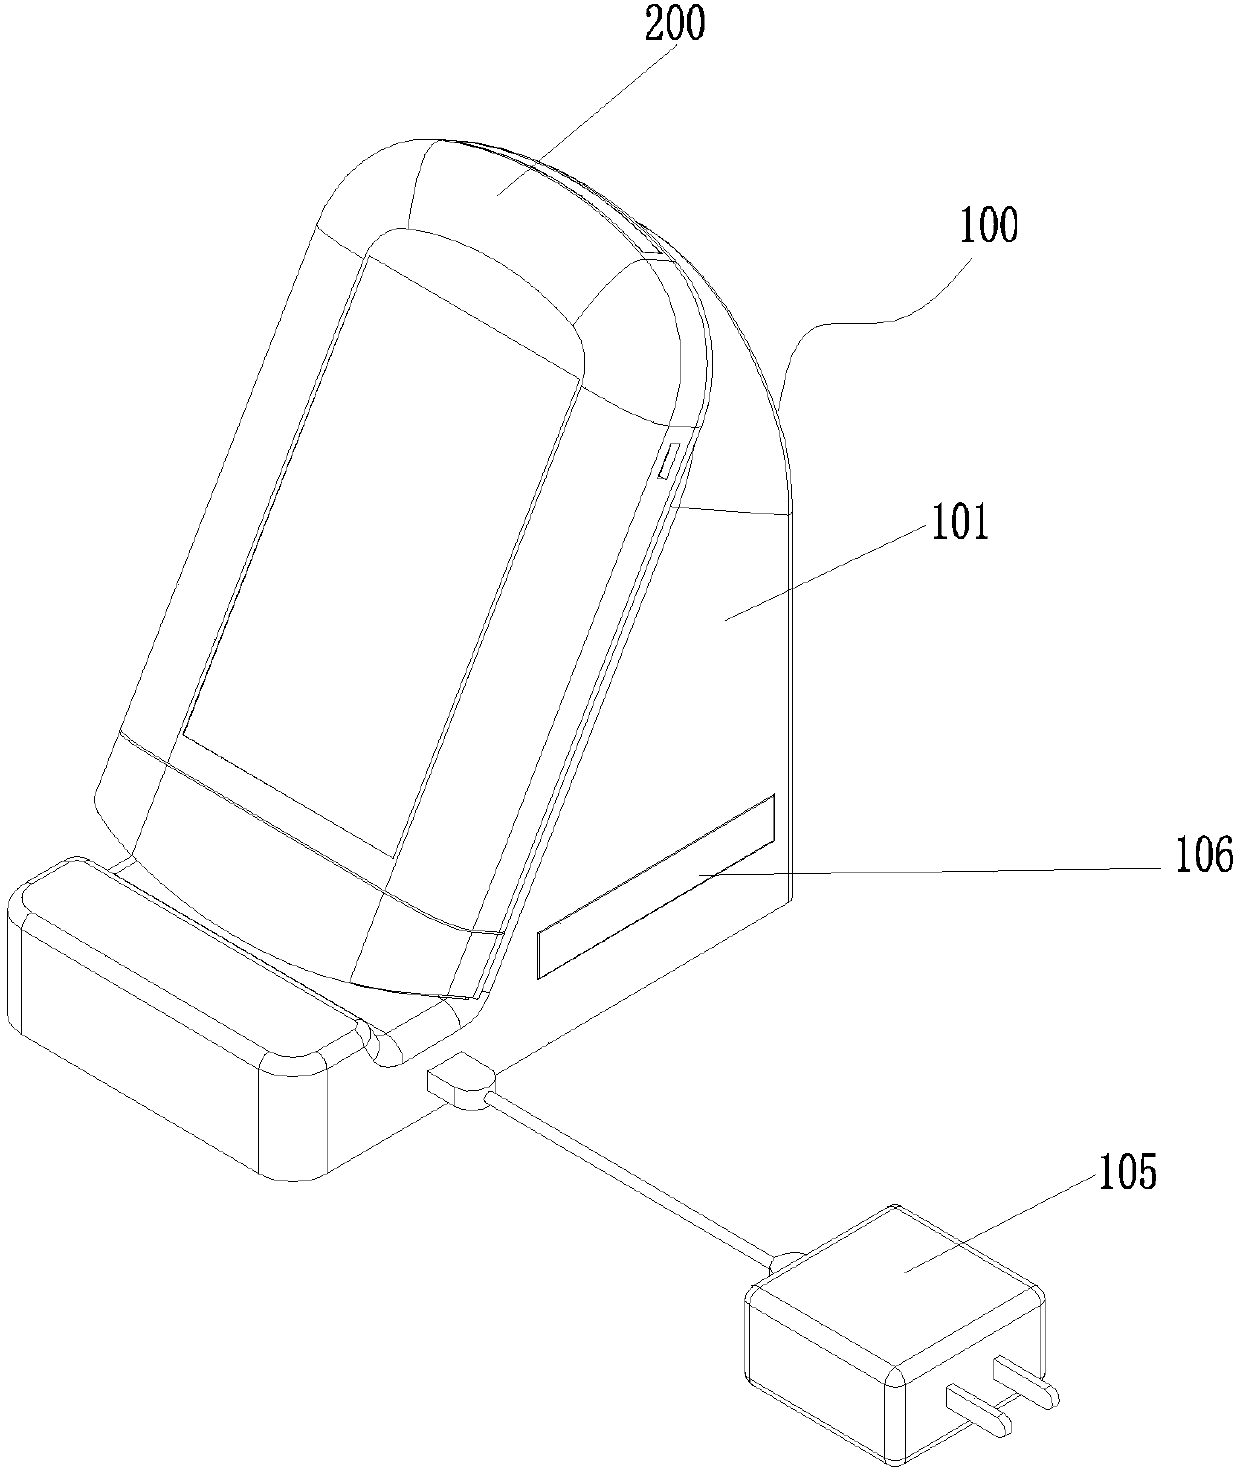 Handheld ultrasonic charging system and device